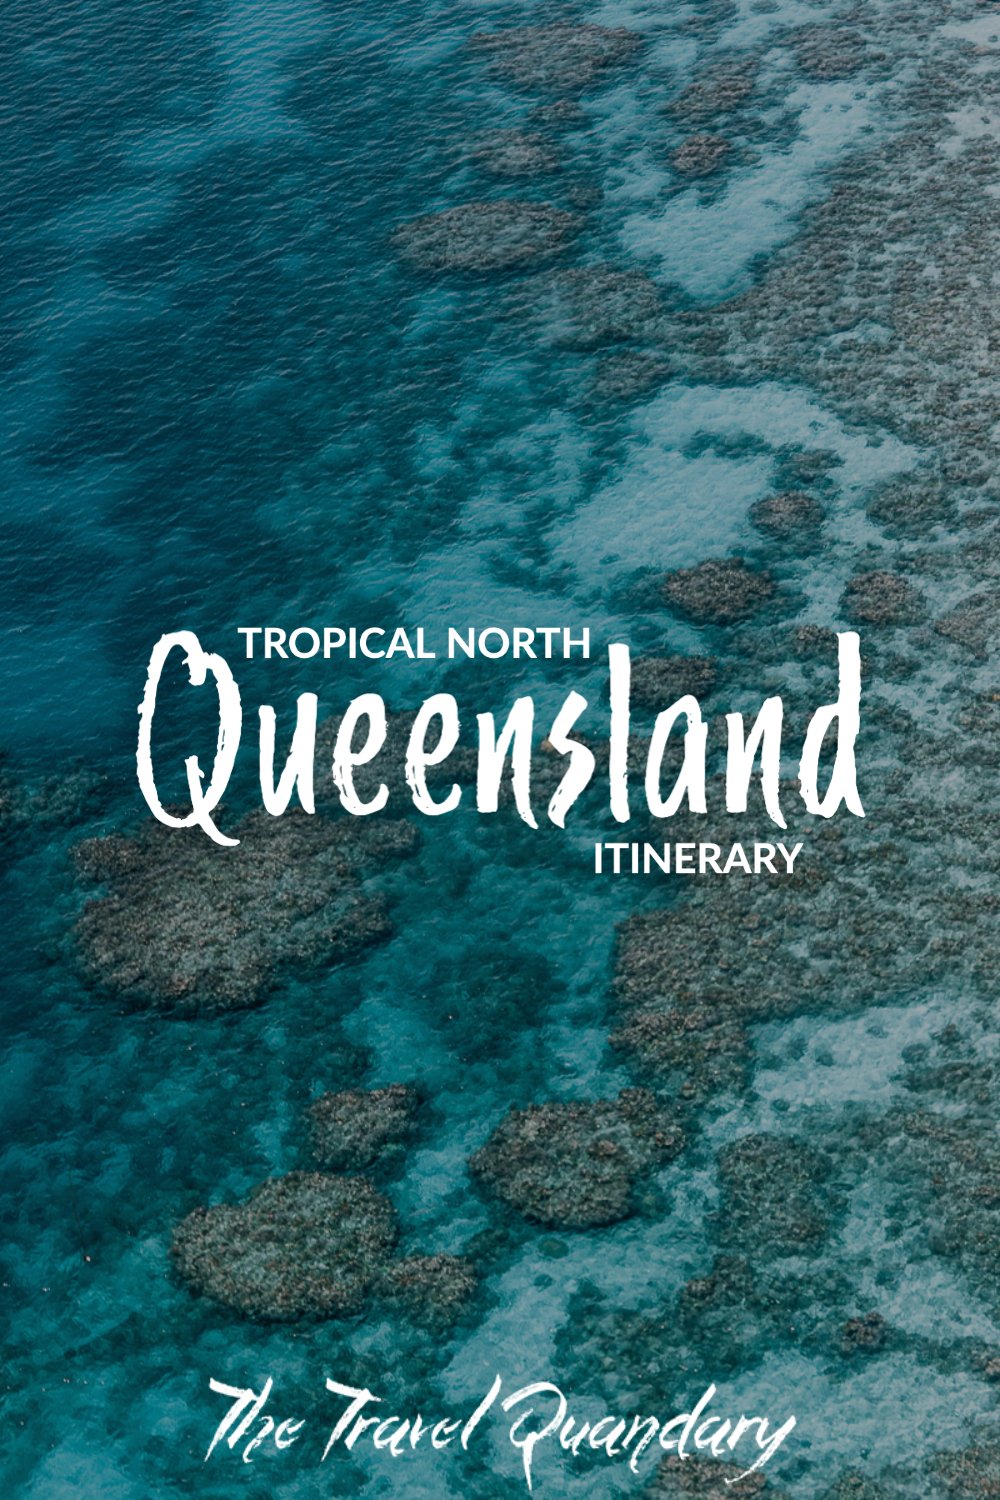 Pin Photo | 9 Day Tropical North Queensland Itinerary